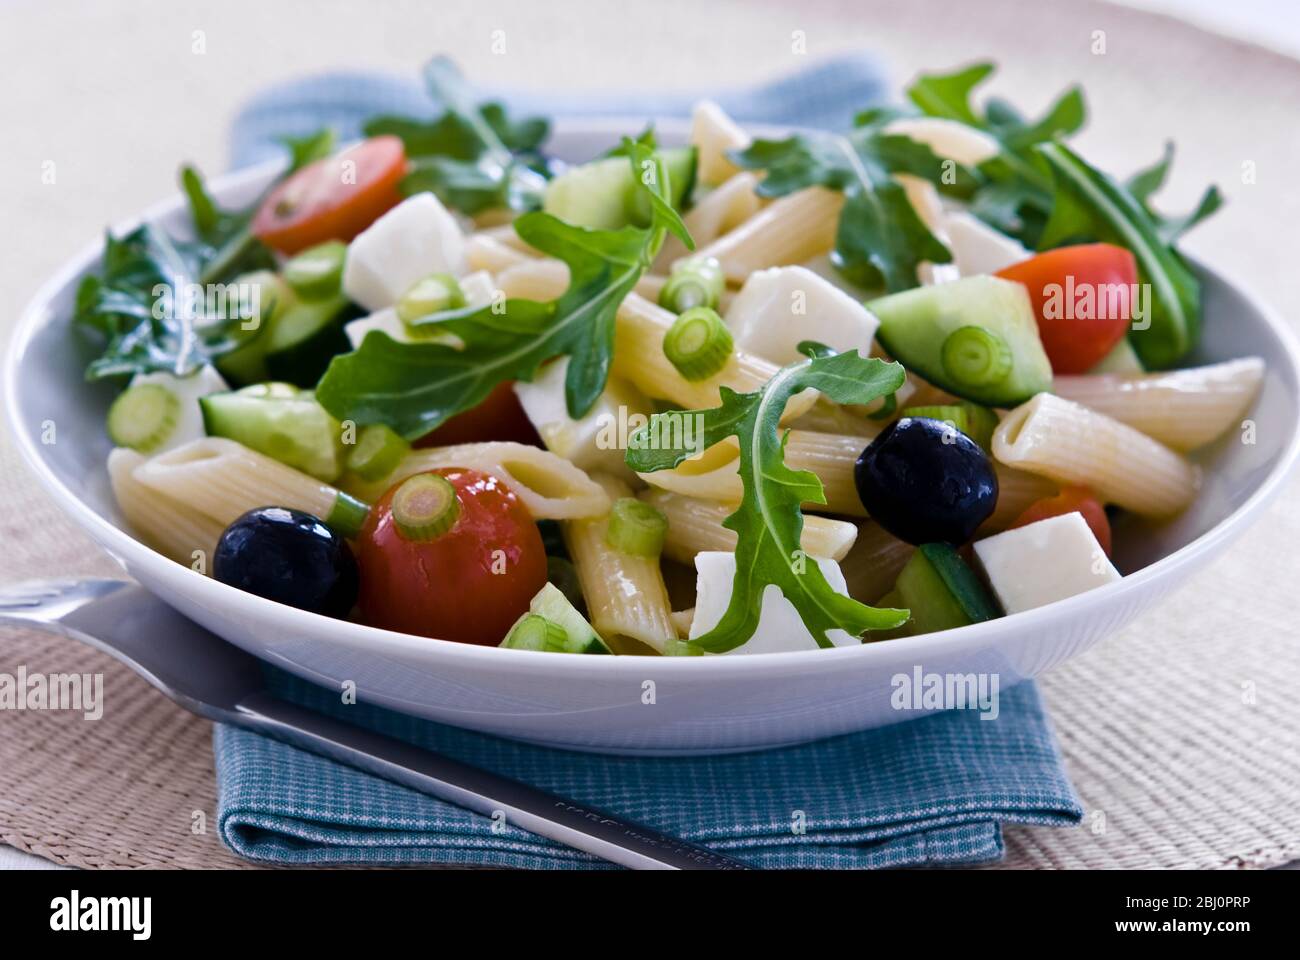 Light, healthy salad of rocket, and mozzarella cubes with penne pasta shapes dresssed in light vinaigrette. Sharper version - Stock Photo